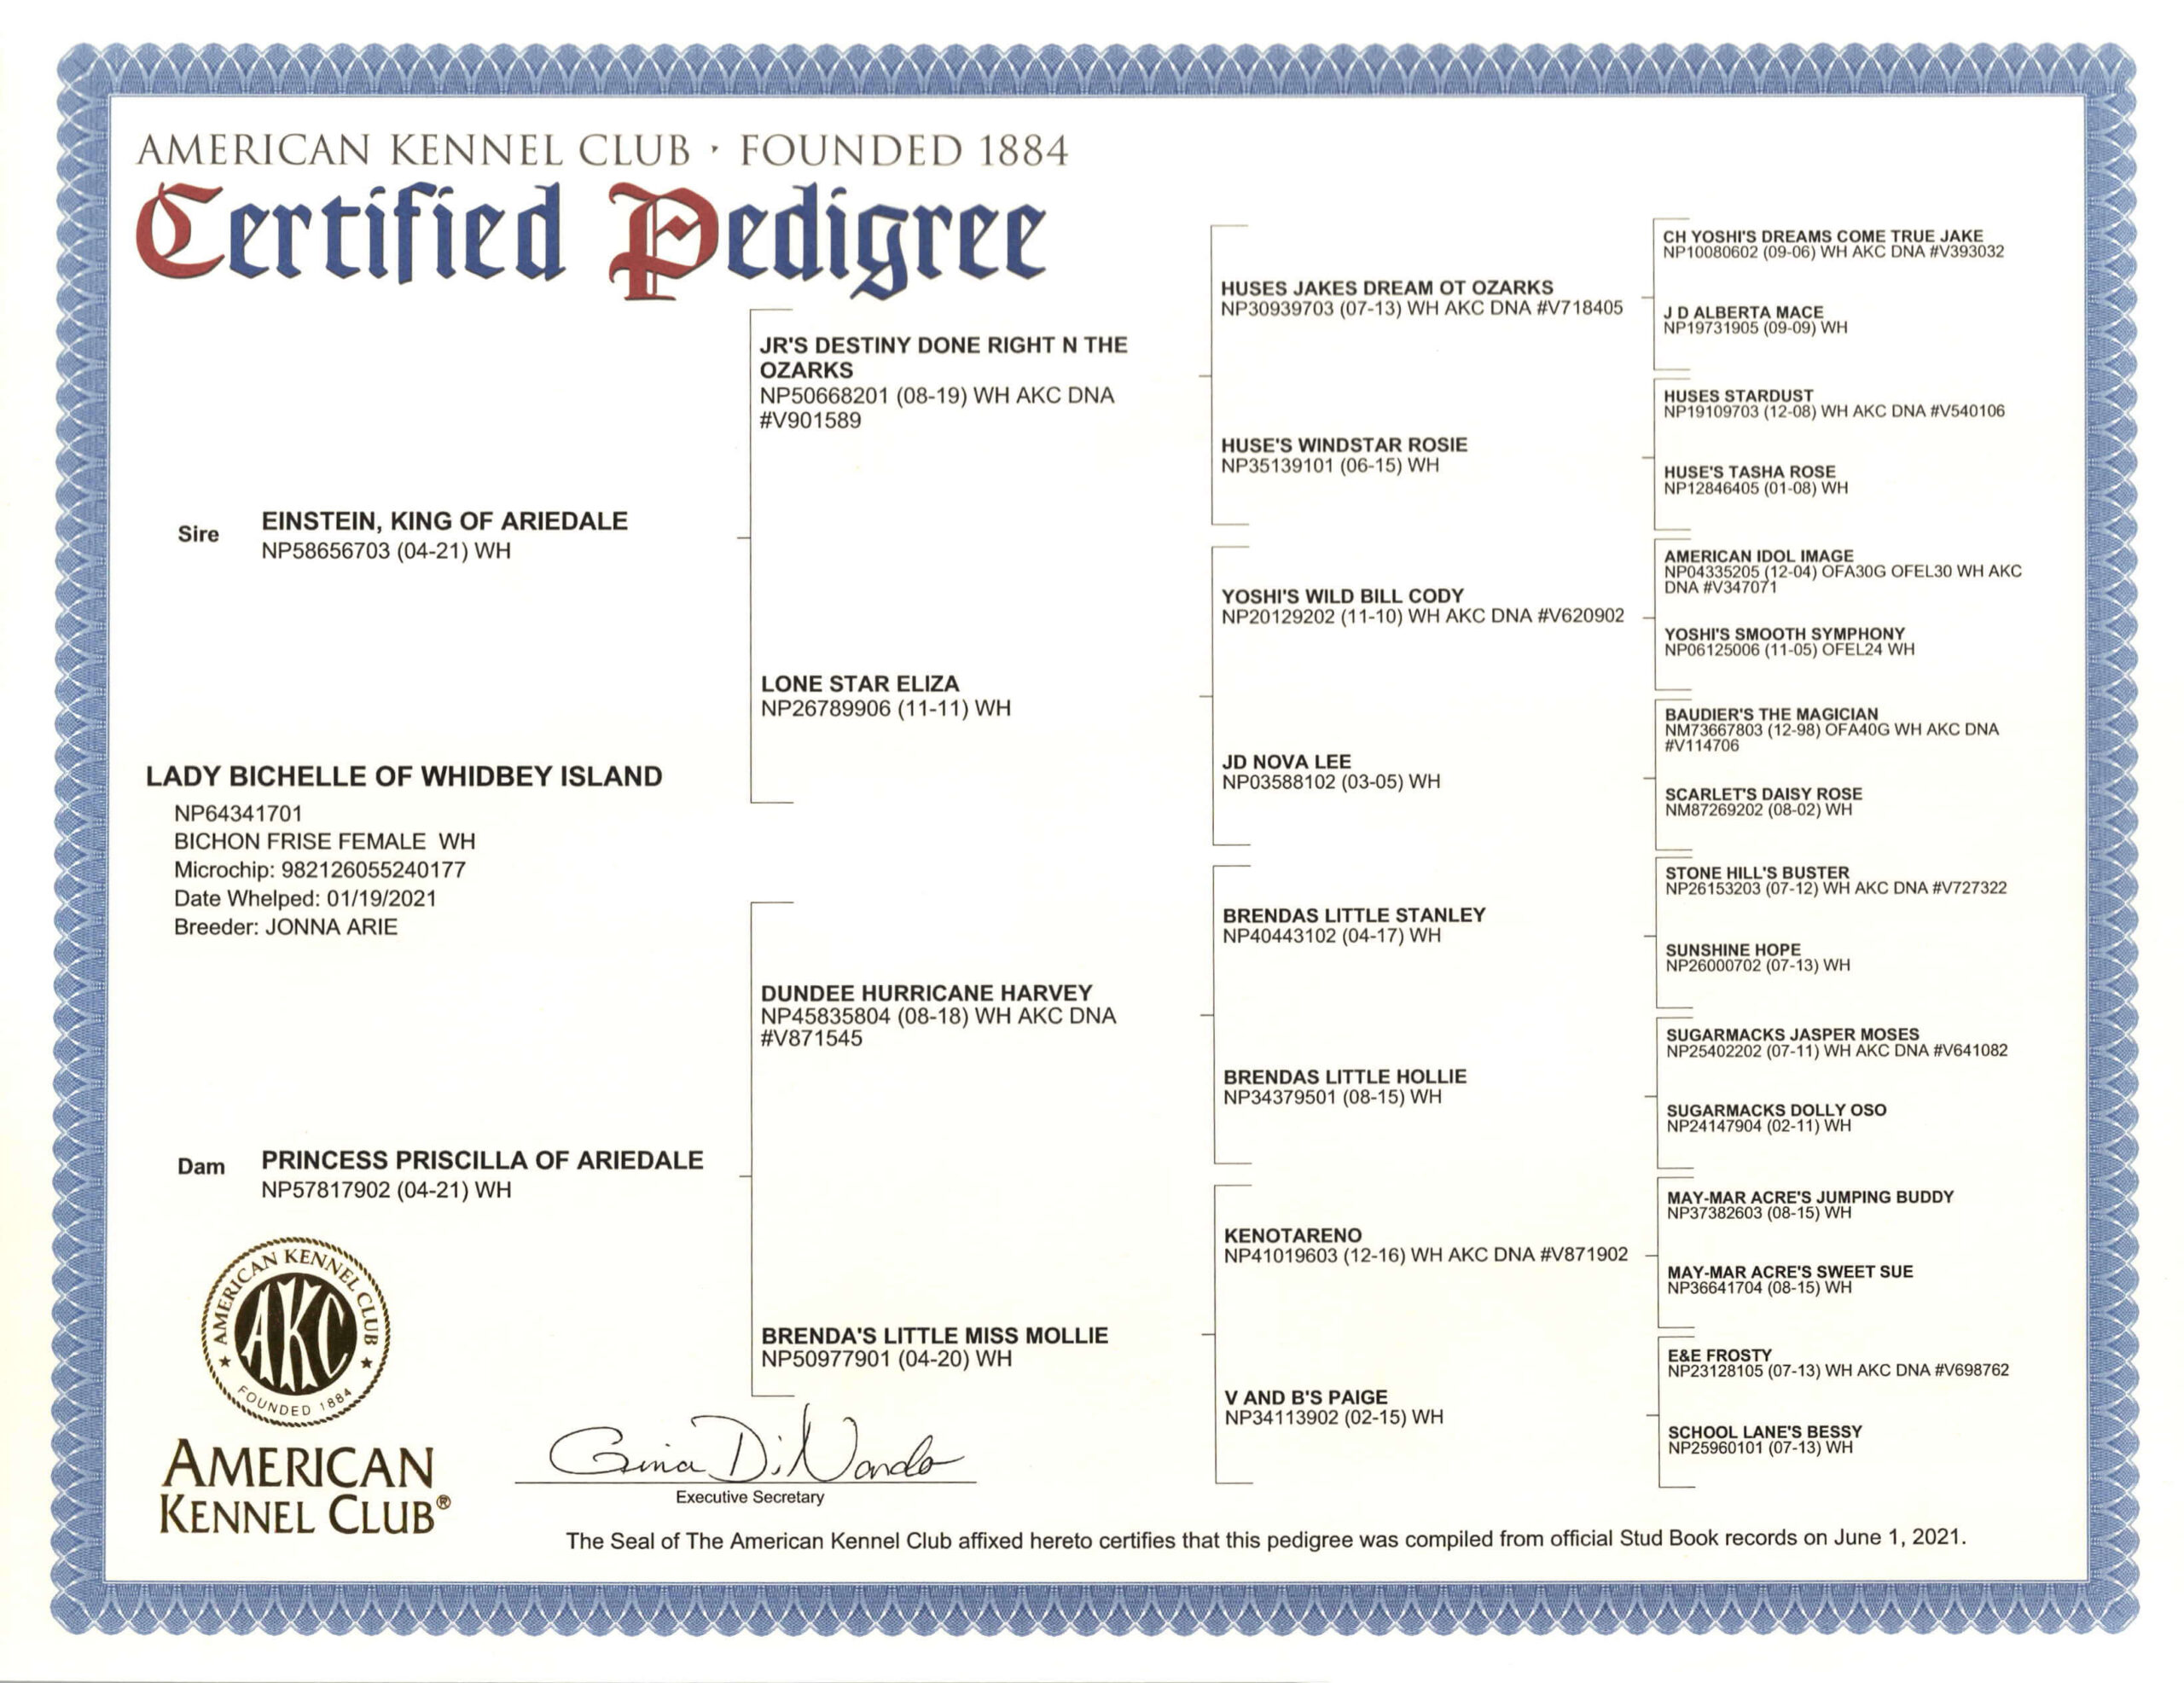 bichelle certified Pedigree with AKC Seal bichon frise of whidbey island_Page